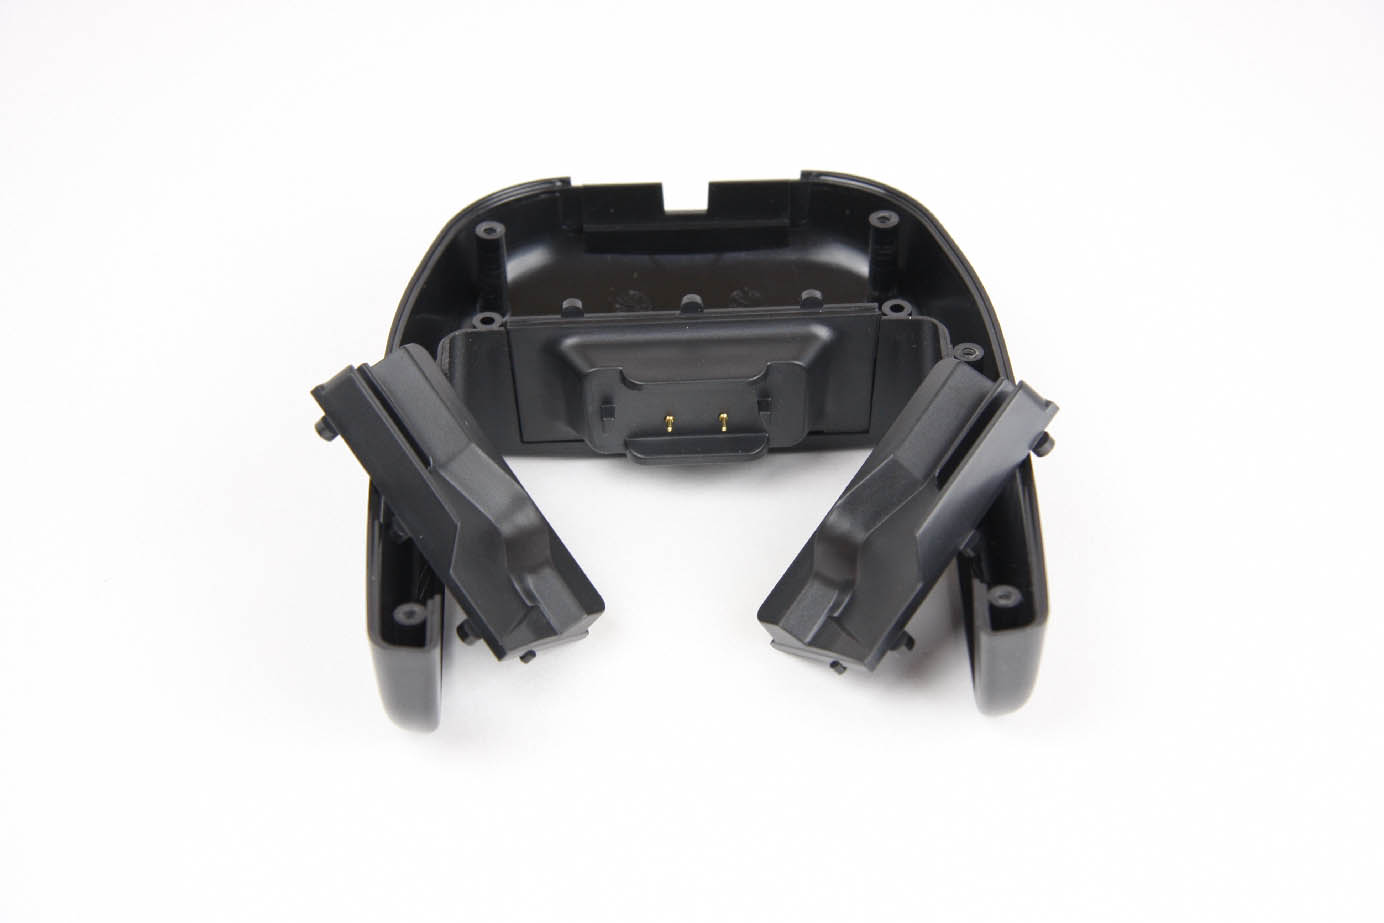 Portsmith Vehicle Phone Chargers are part of Slot-System